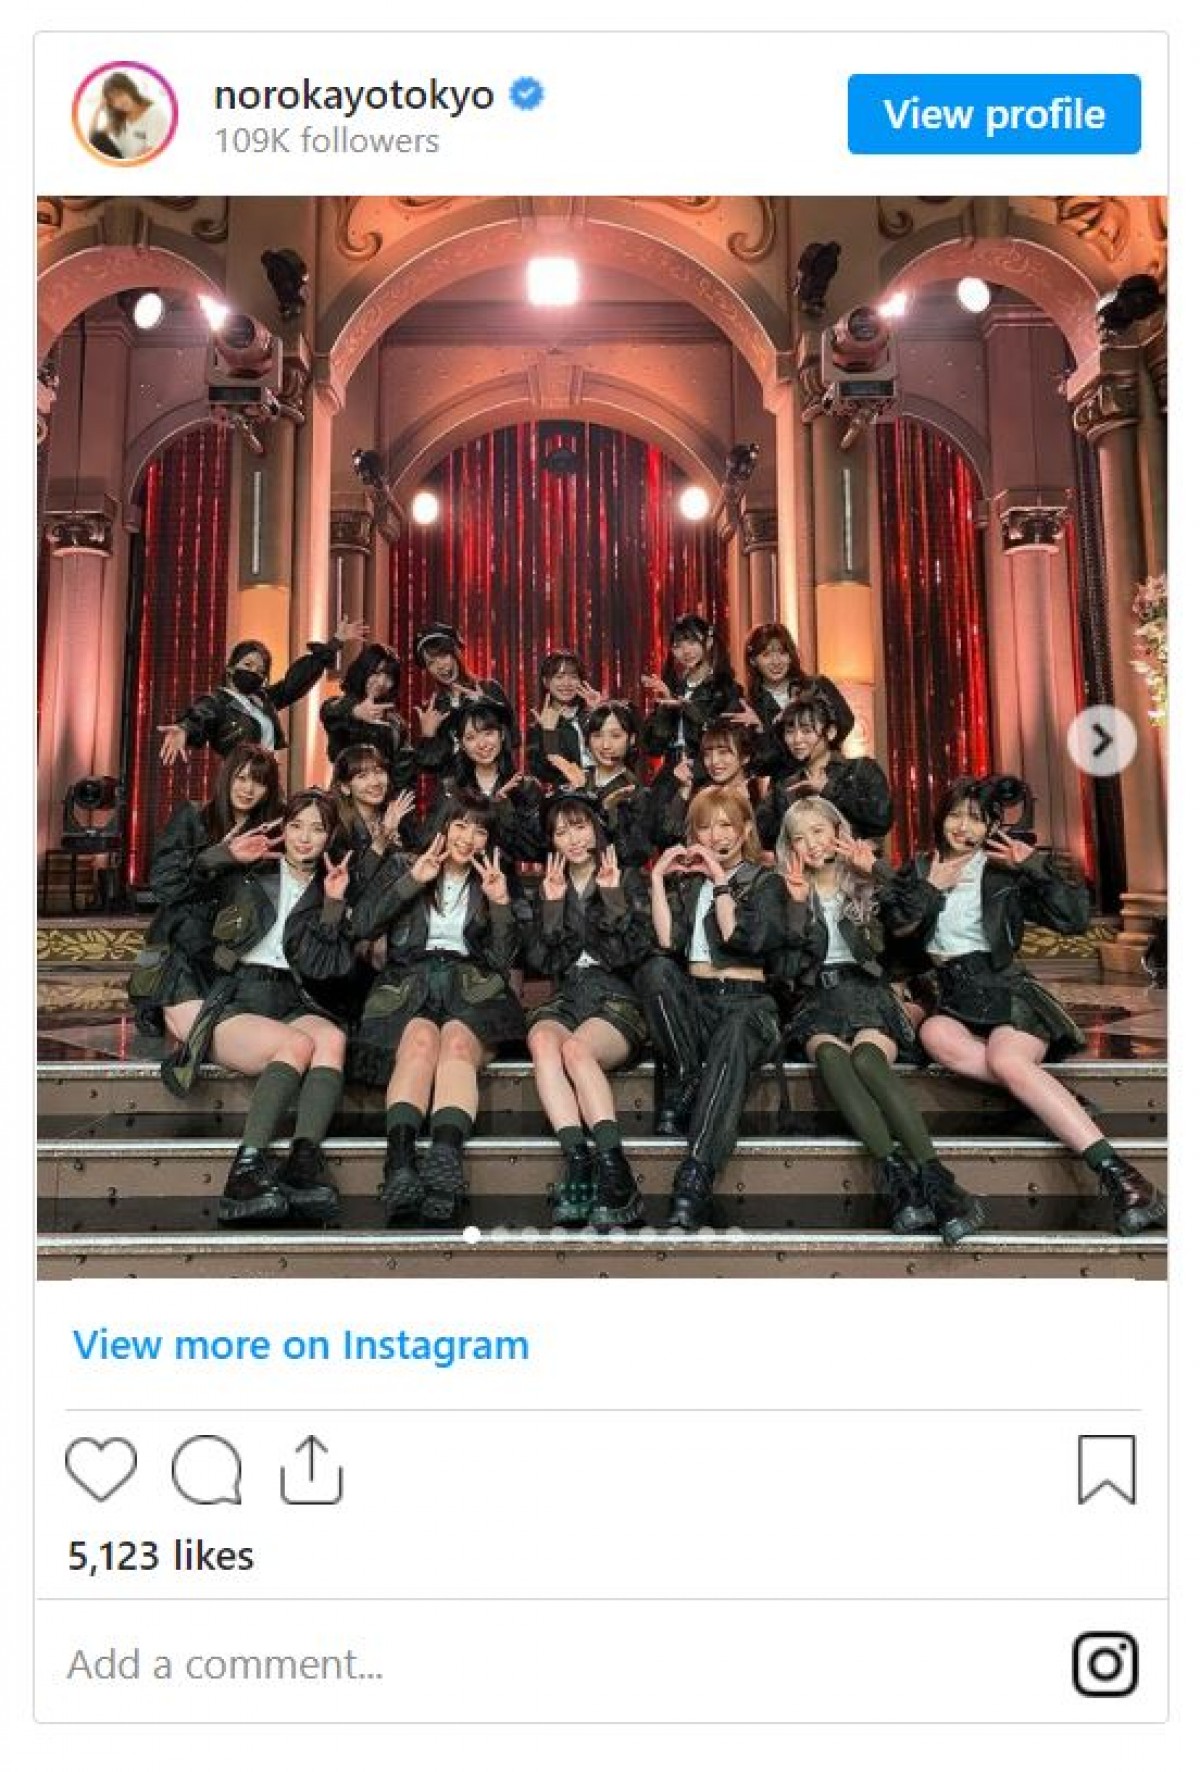 『FNS歌謡祭』で話題　野呂佳代とAKB48現役メンバーの集合写真　篠田麻里子も「違和感なし」